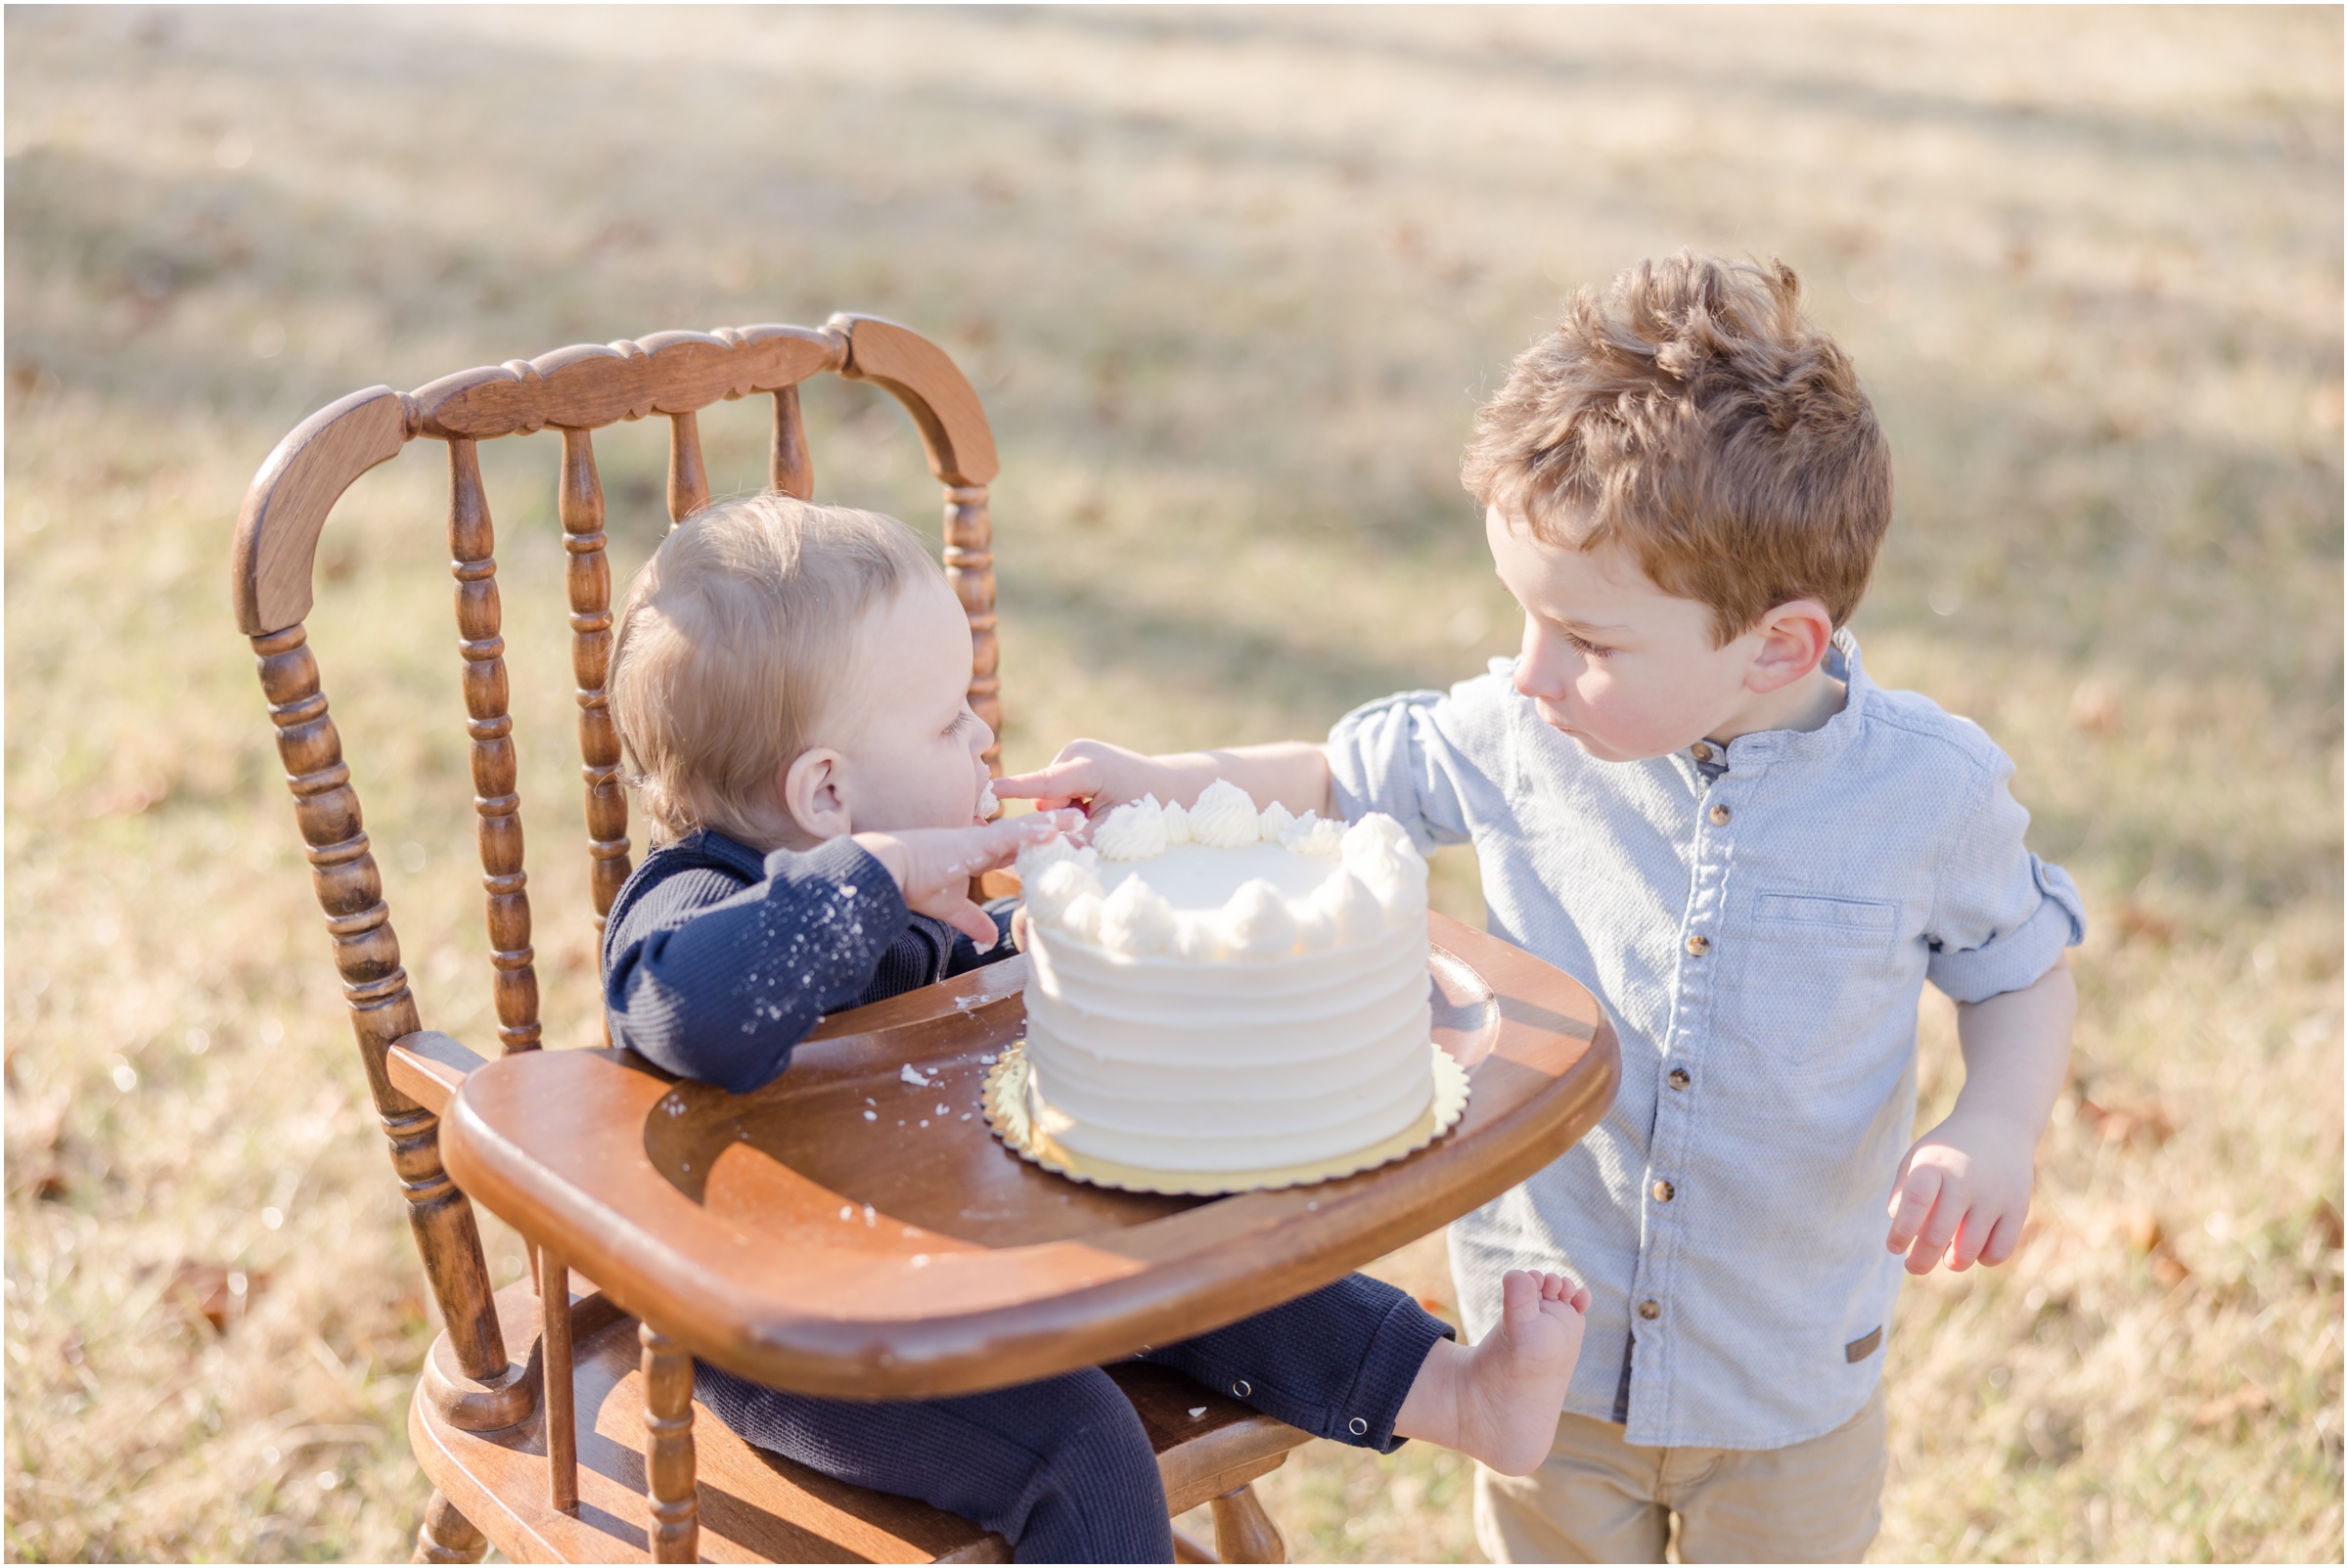 A three year old boy extends his icing covered finger to his baby brother during cake smash photos in Greenville.